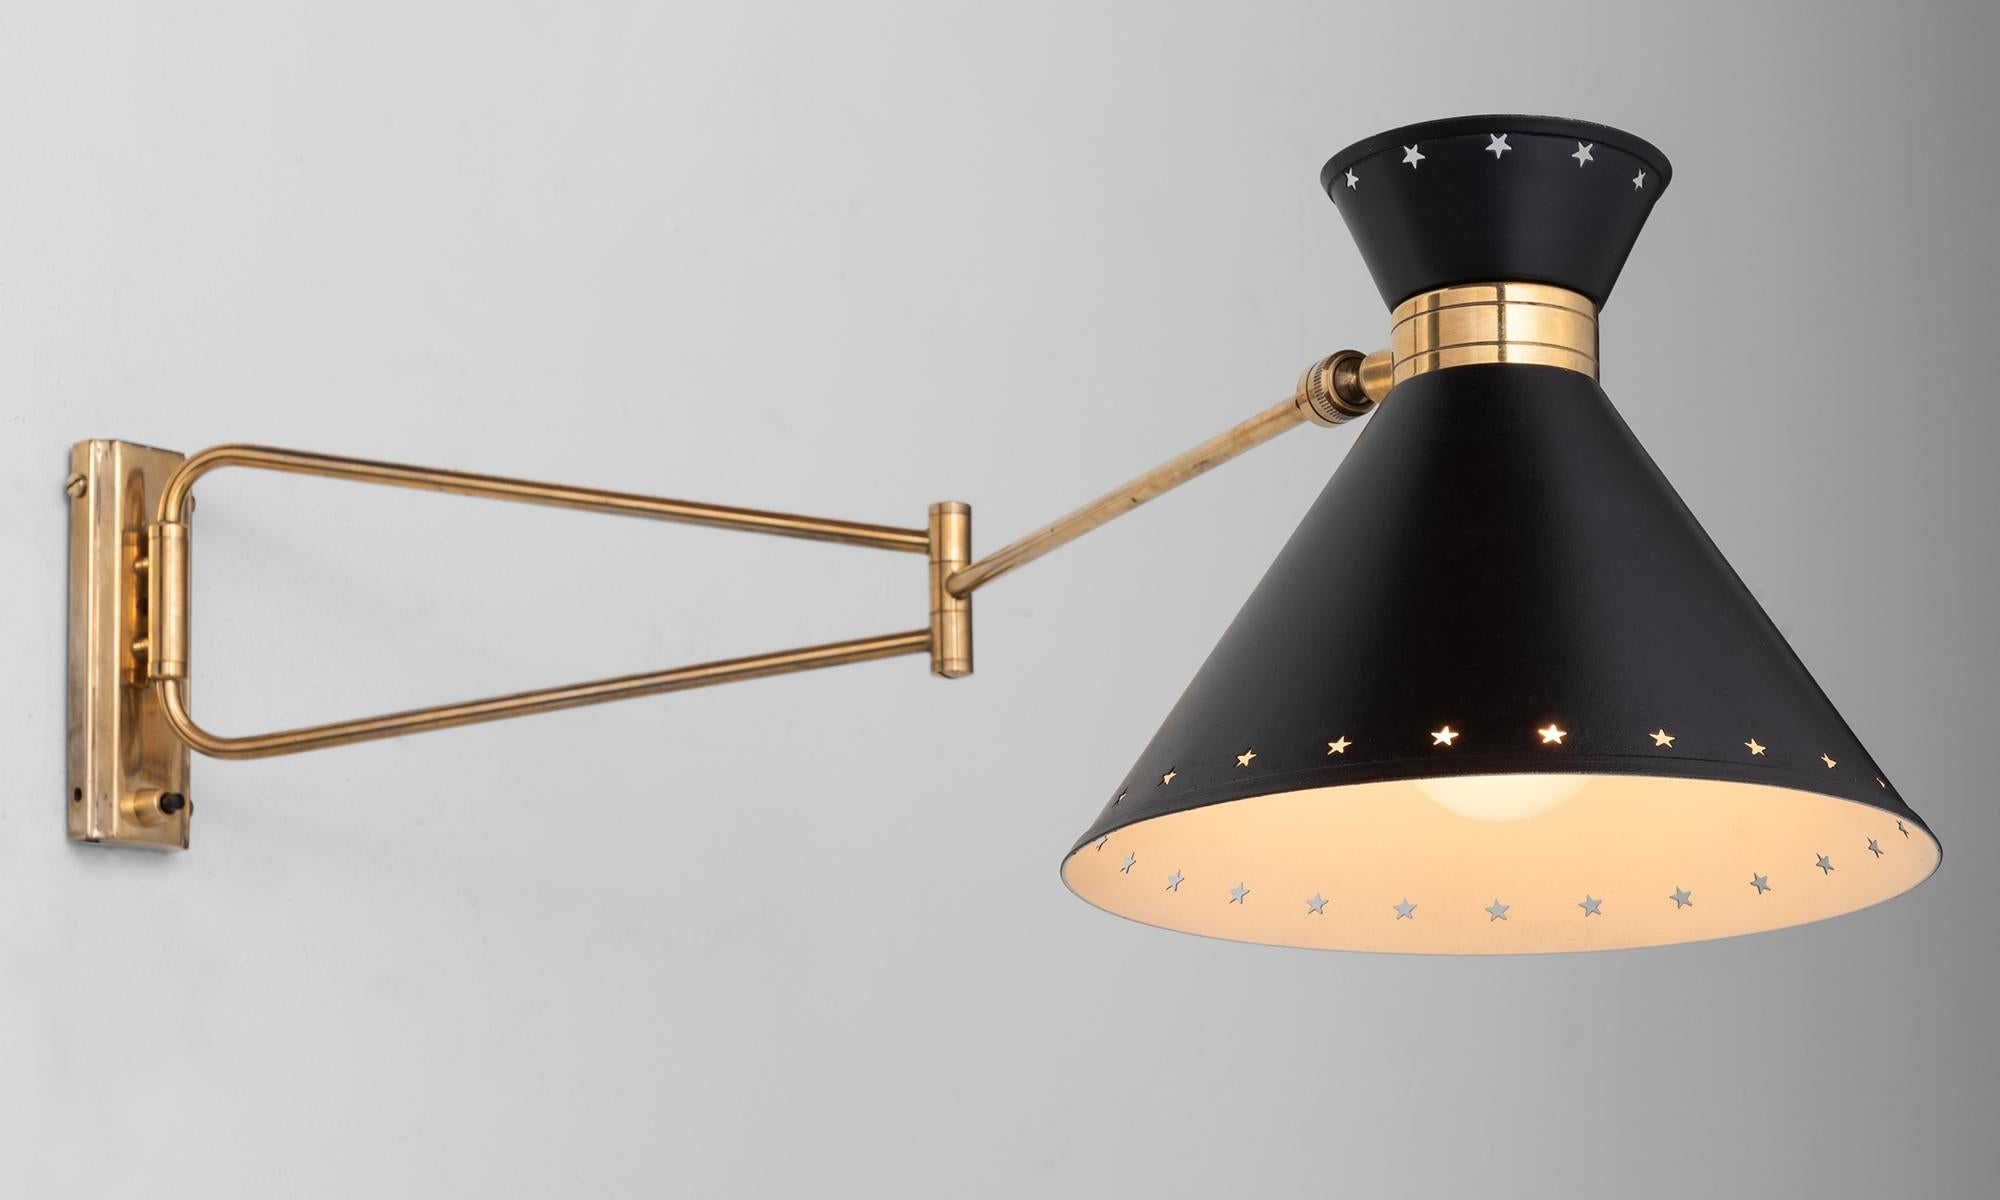 Rene Mathieu swing arm sconce, France, circa 1950.

Brass-plated metal hardware and perforated black shade with swing arm and switch on backplate. Produced by Lunel.